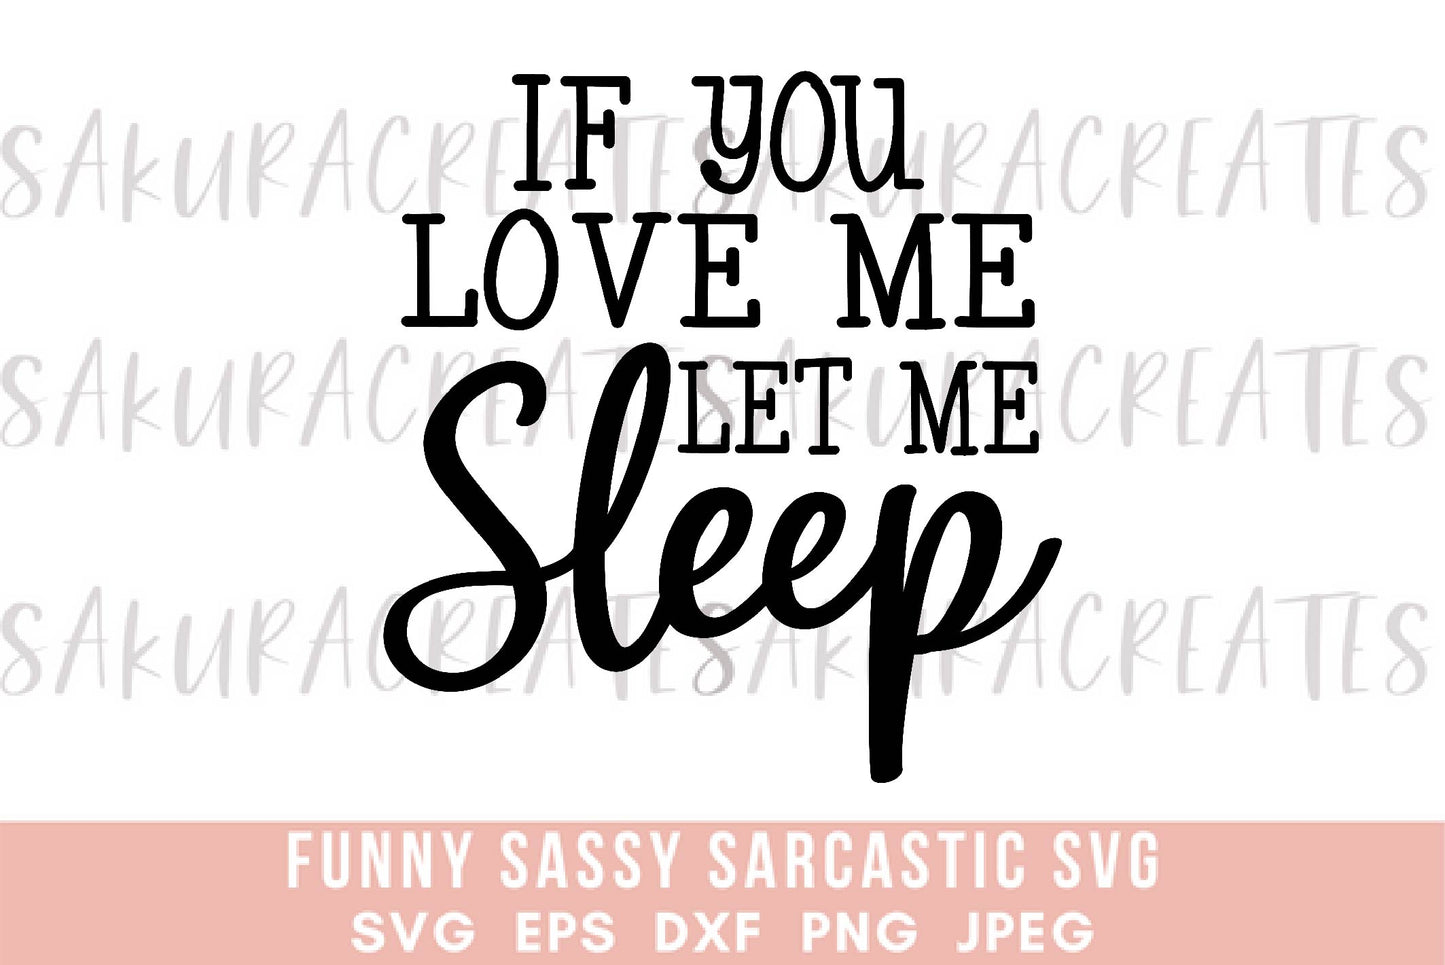 If you love me let me sleep SVG DXF EPS PNG JPEG SVG cut file silhouette cricut funny sarcastic sassy quotes sayings